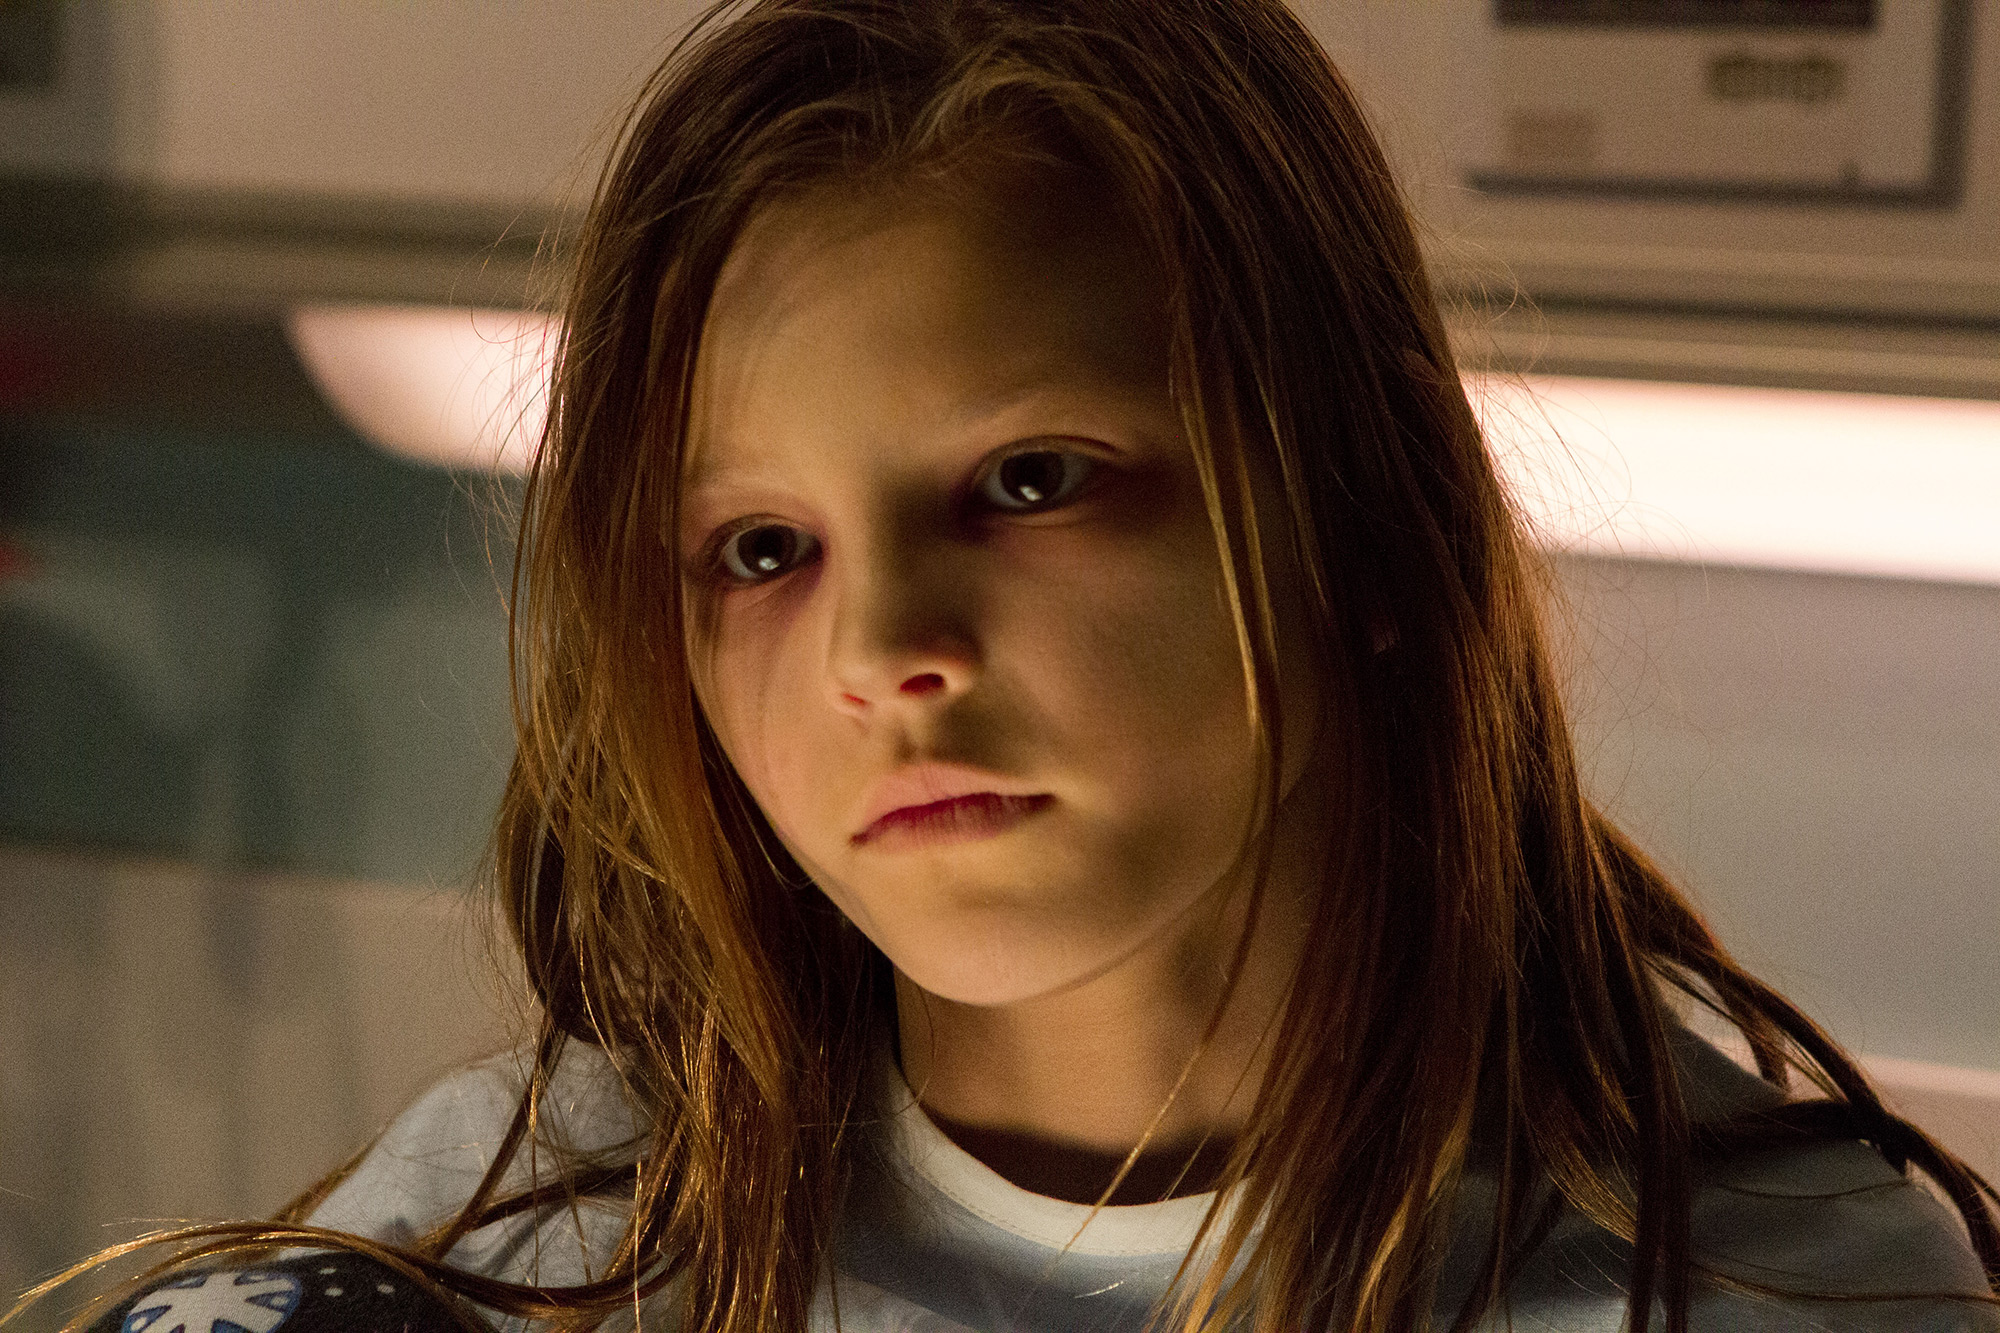 xx_the-box-peyton-kennedy-credit-magnet-releasing